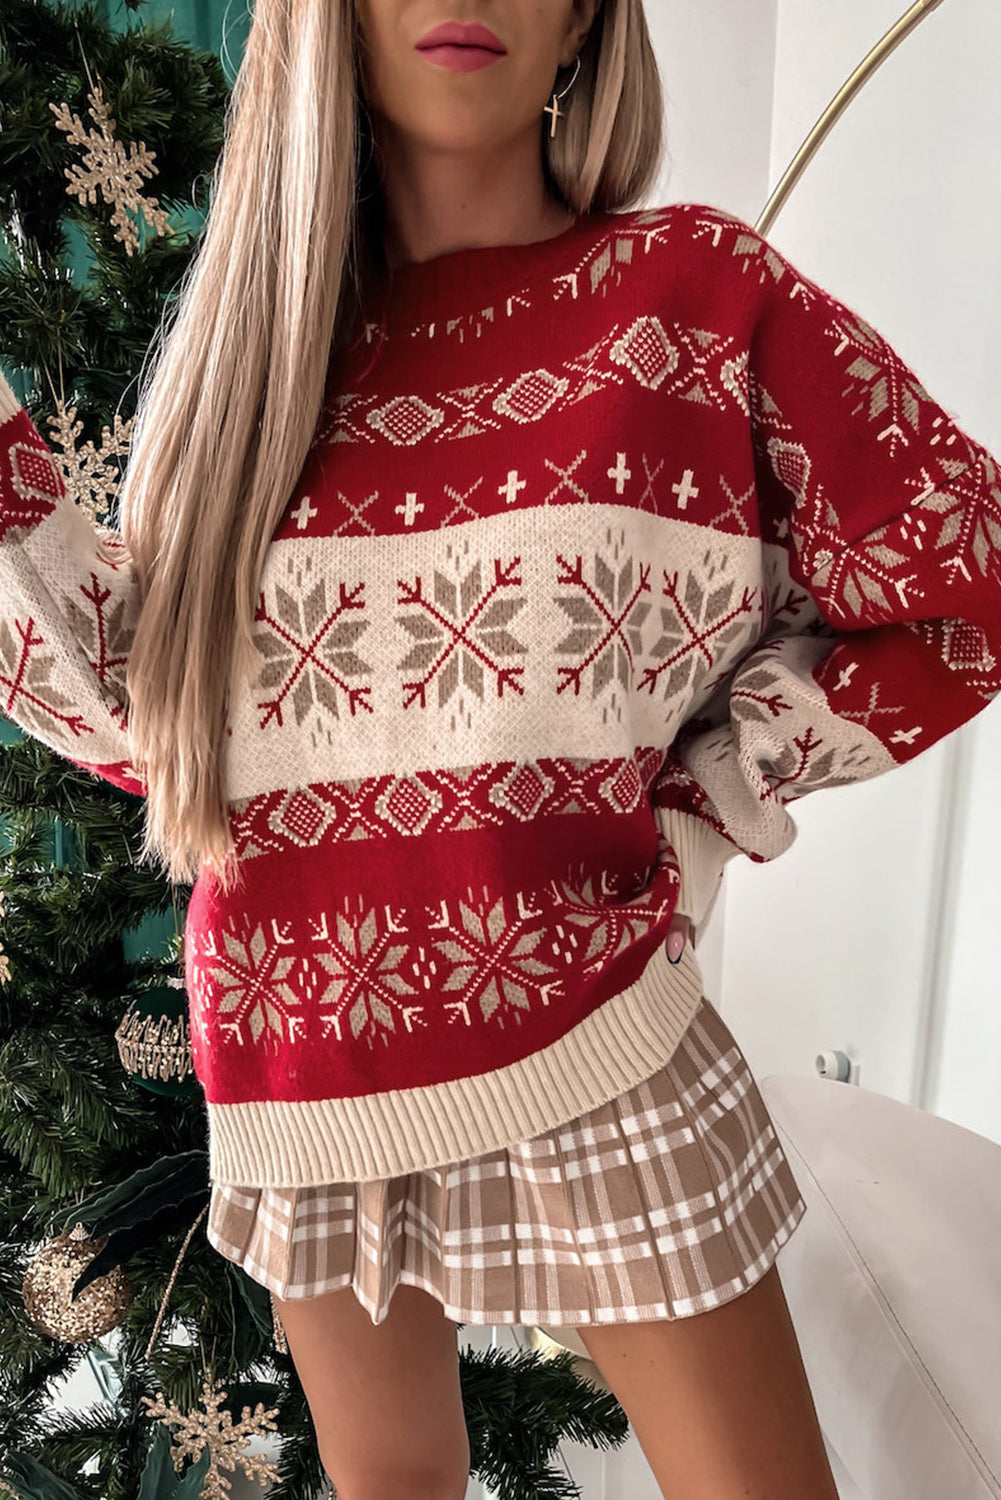 LC2722541-3-S, LC2722541-3-M, LC2722541-3-L, LC2722541-3-XL, LC2722541-3-2XL, Red Christmas Snowflake Ugly Christmas Sweater Jumper Pullover Tops